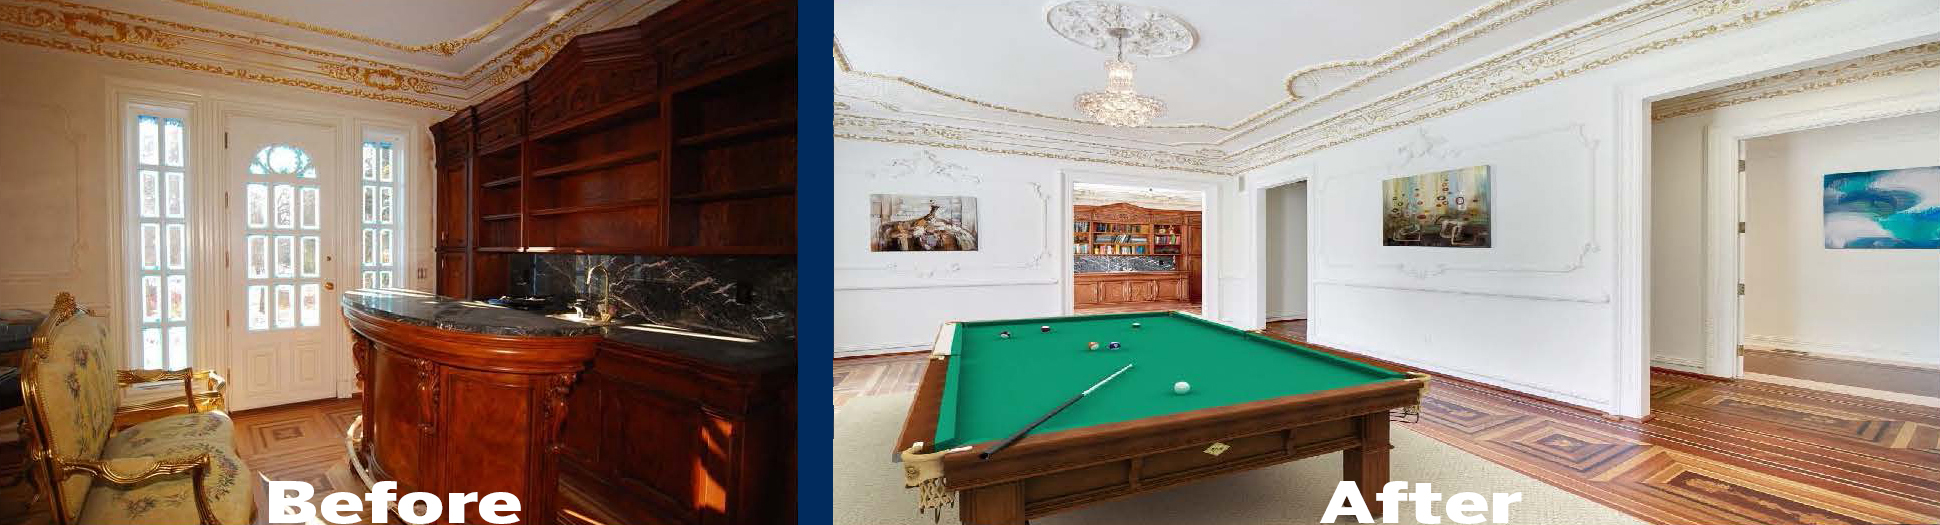 Billiard Room Before & After